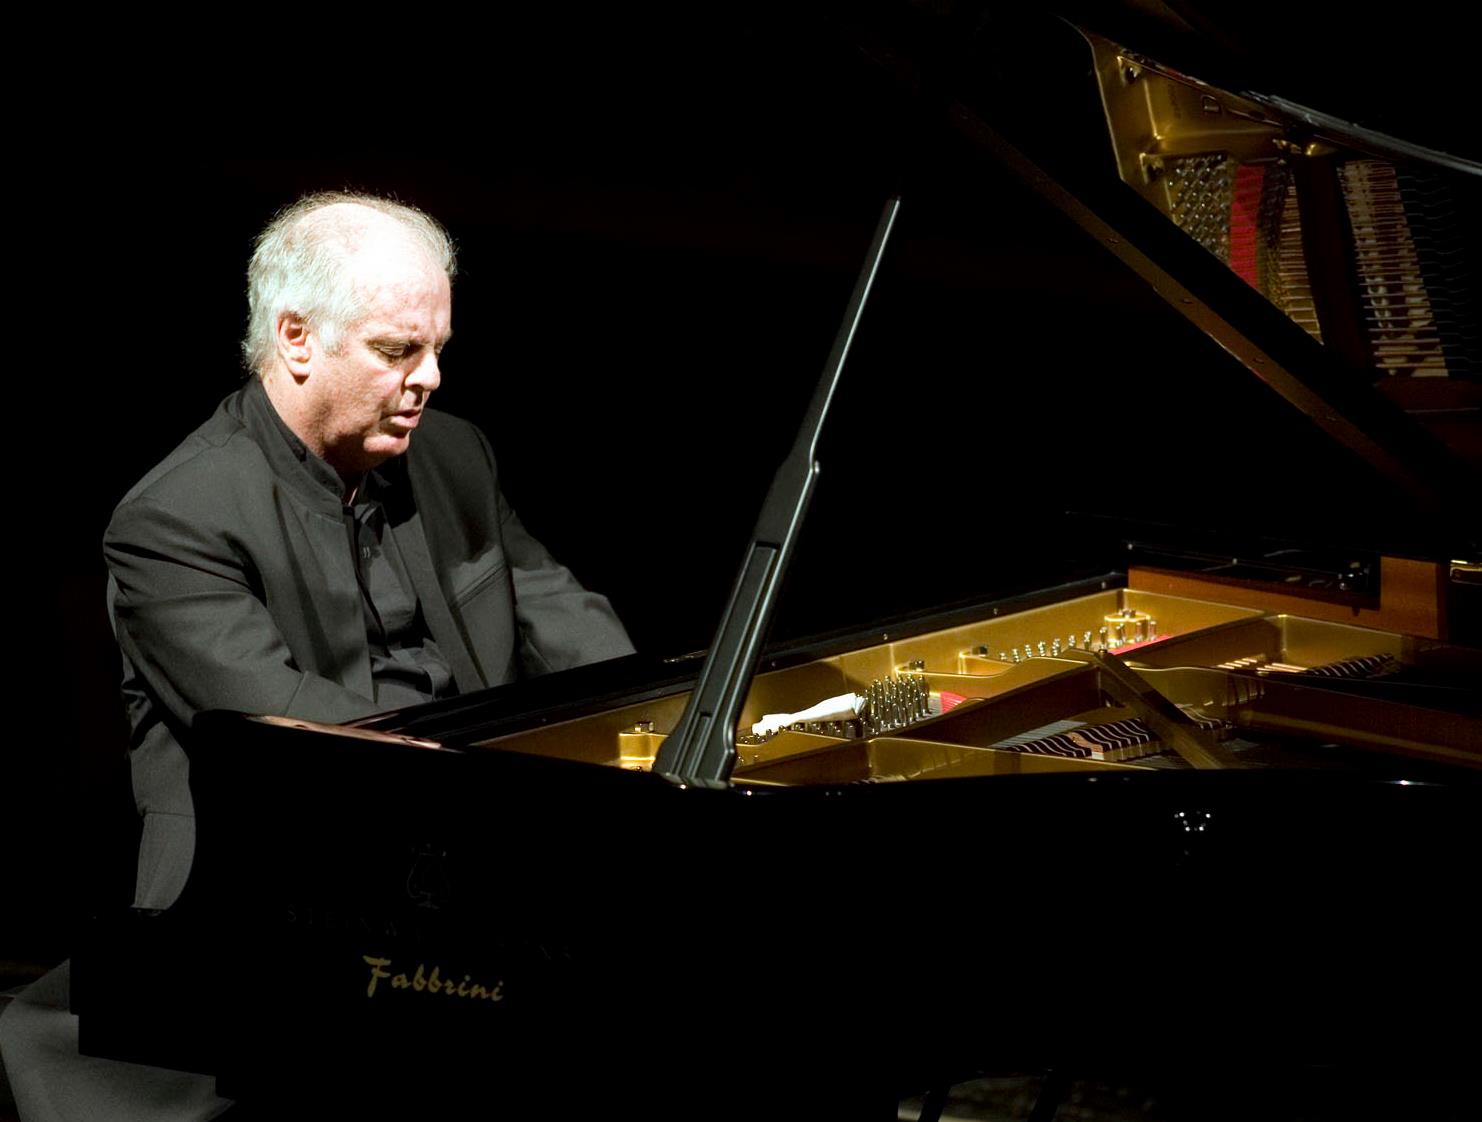 Doctors say Barenboim will be back ‘within weeks’